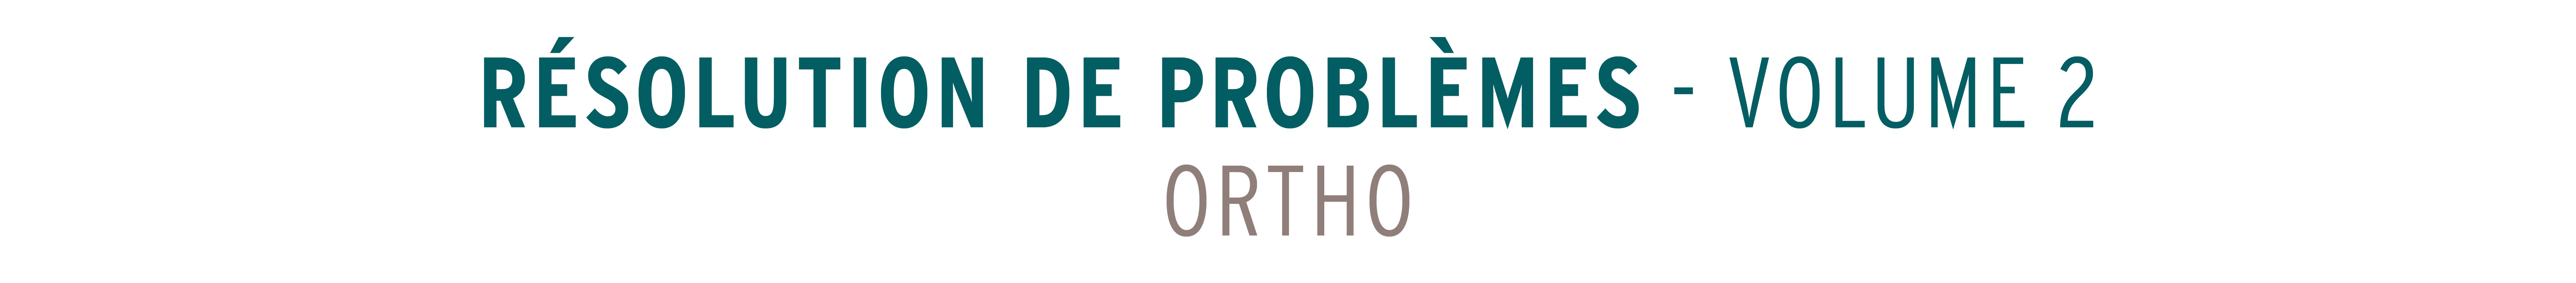 resolution problemes volume 2 ortho